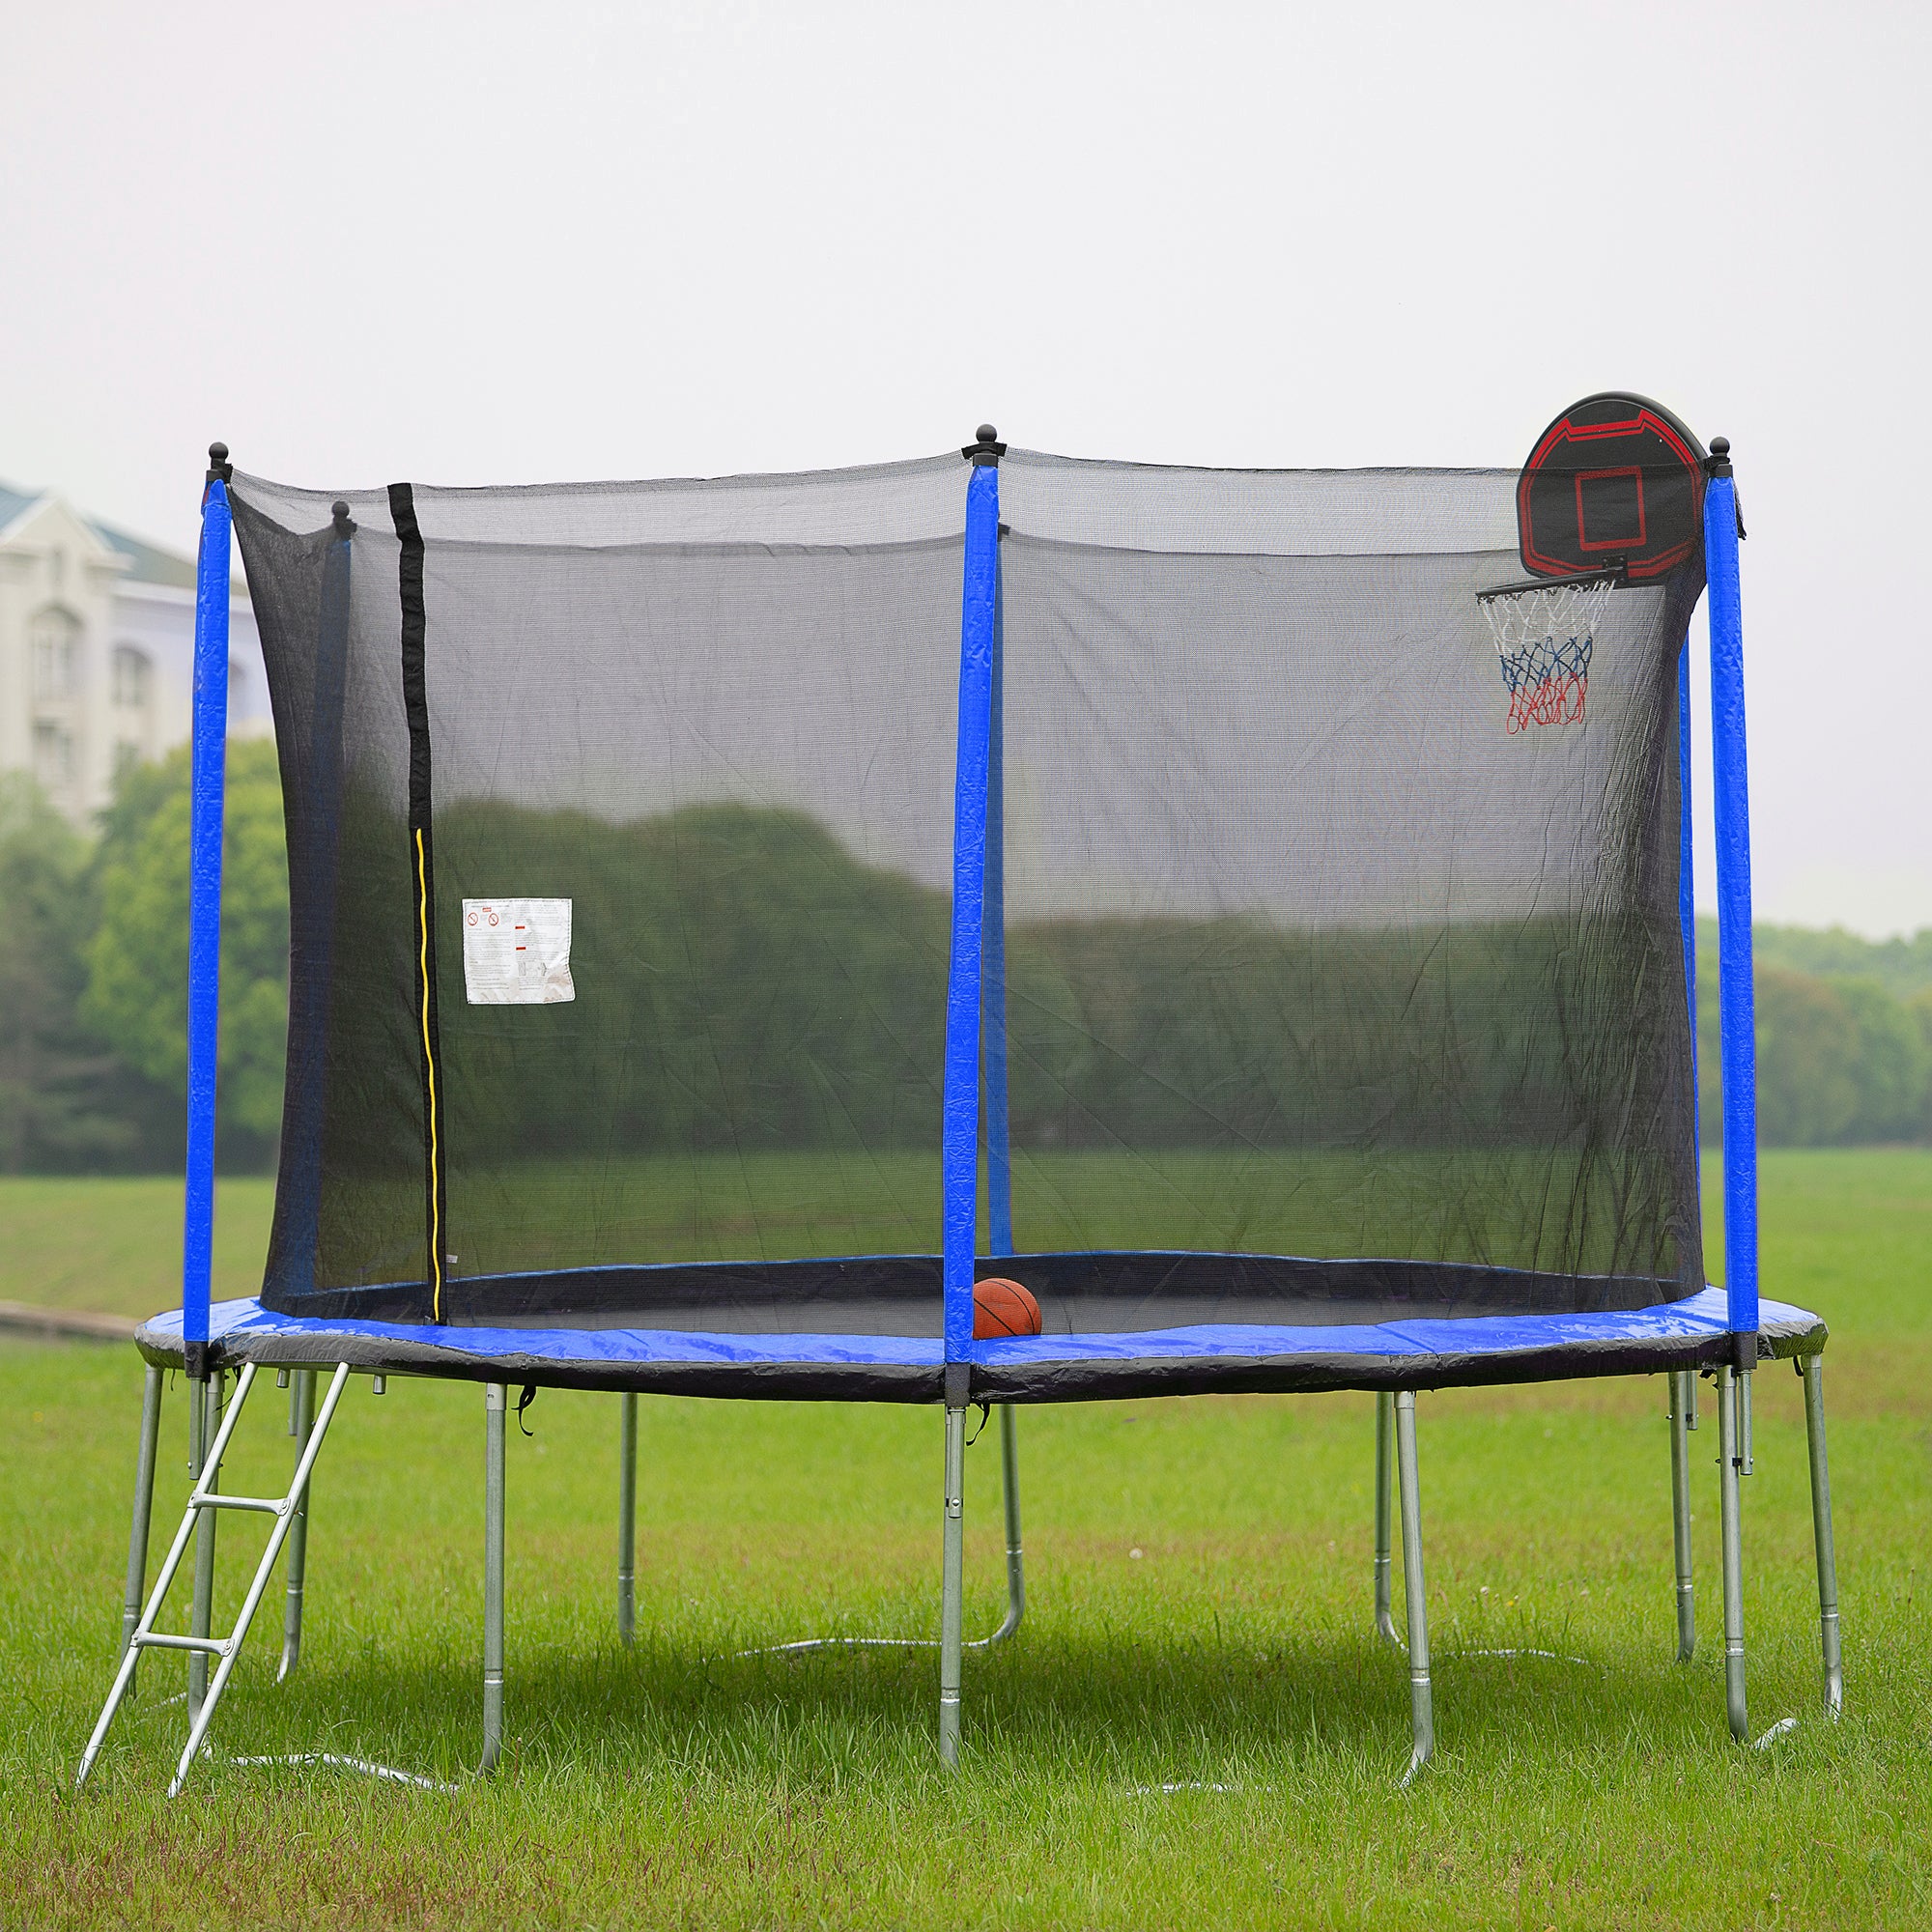 Yc 14ft Trampoline with Basketball Hoop Inflator